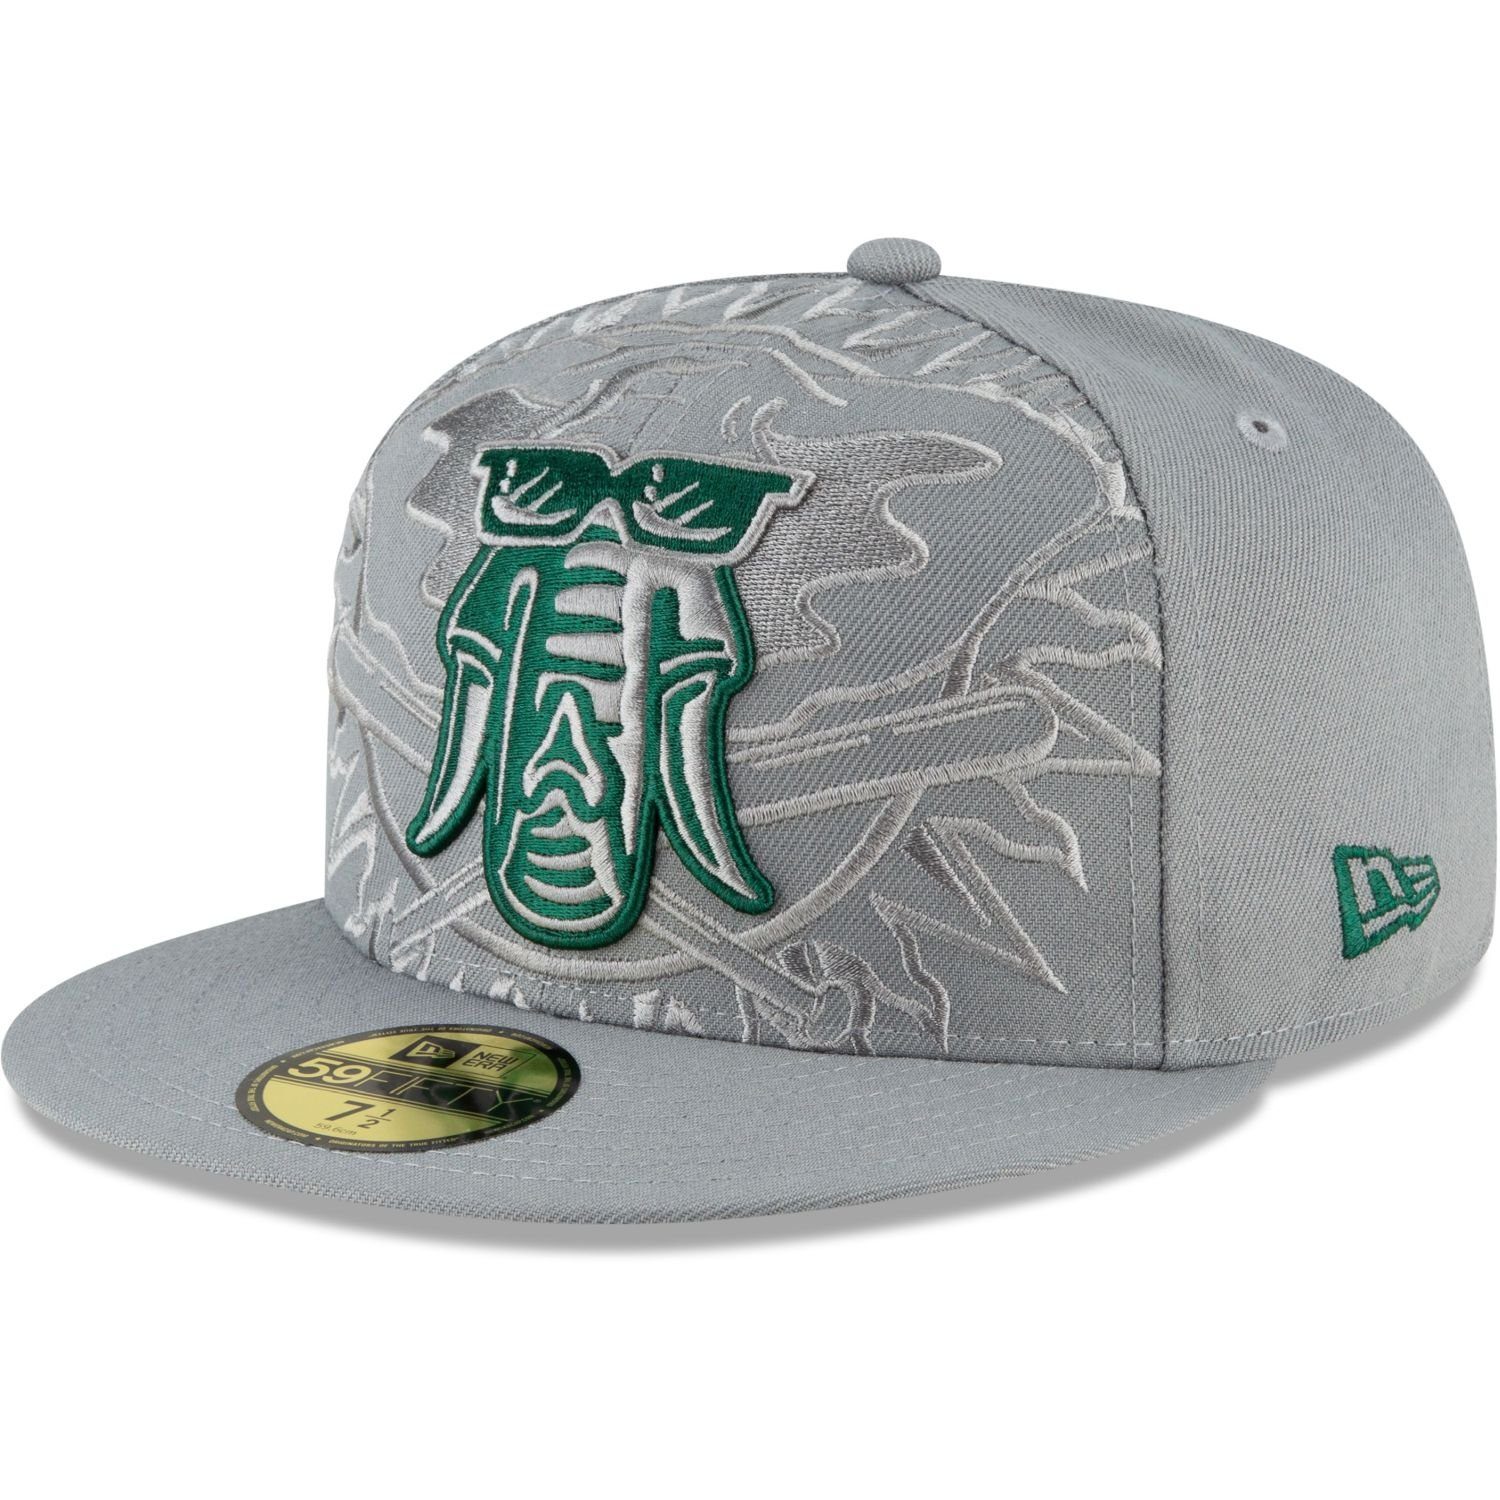 New Era Fitted Cap 59Fifty STORM GREY MLB Cooperstown Team Oakland Athletics